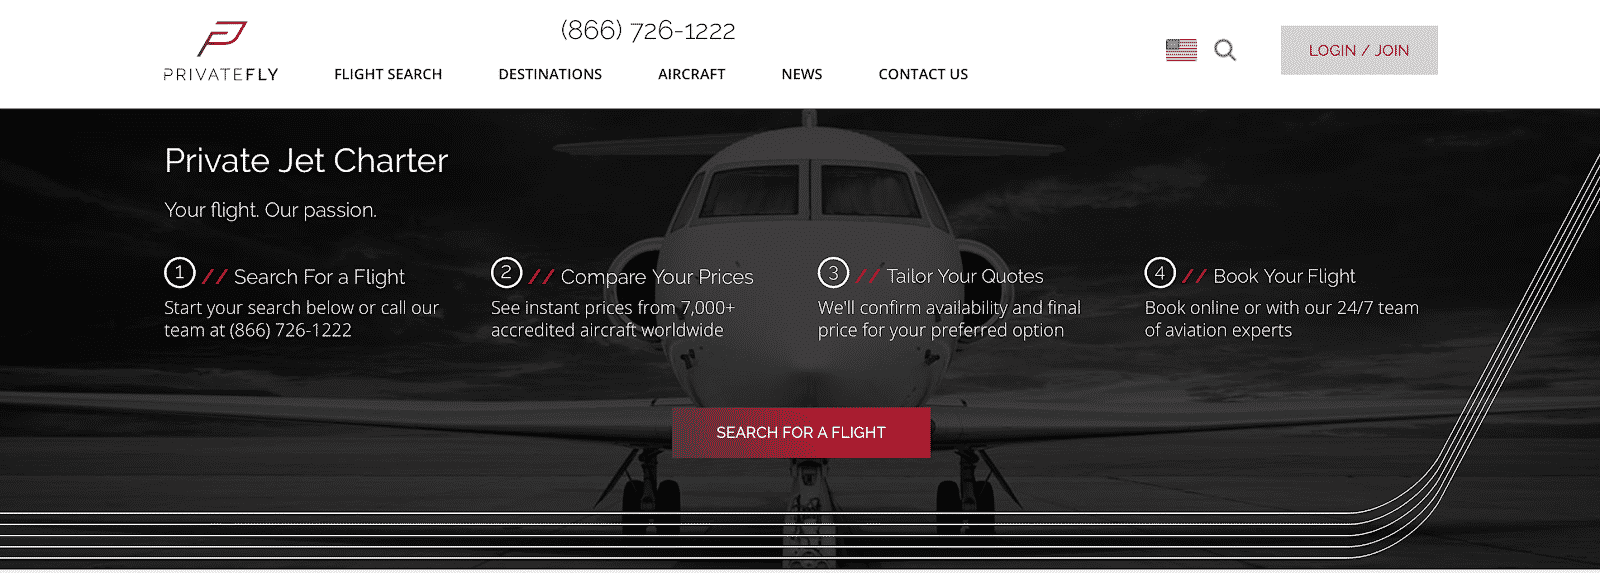 The PrivateFly homepage